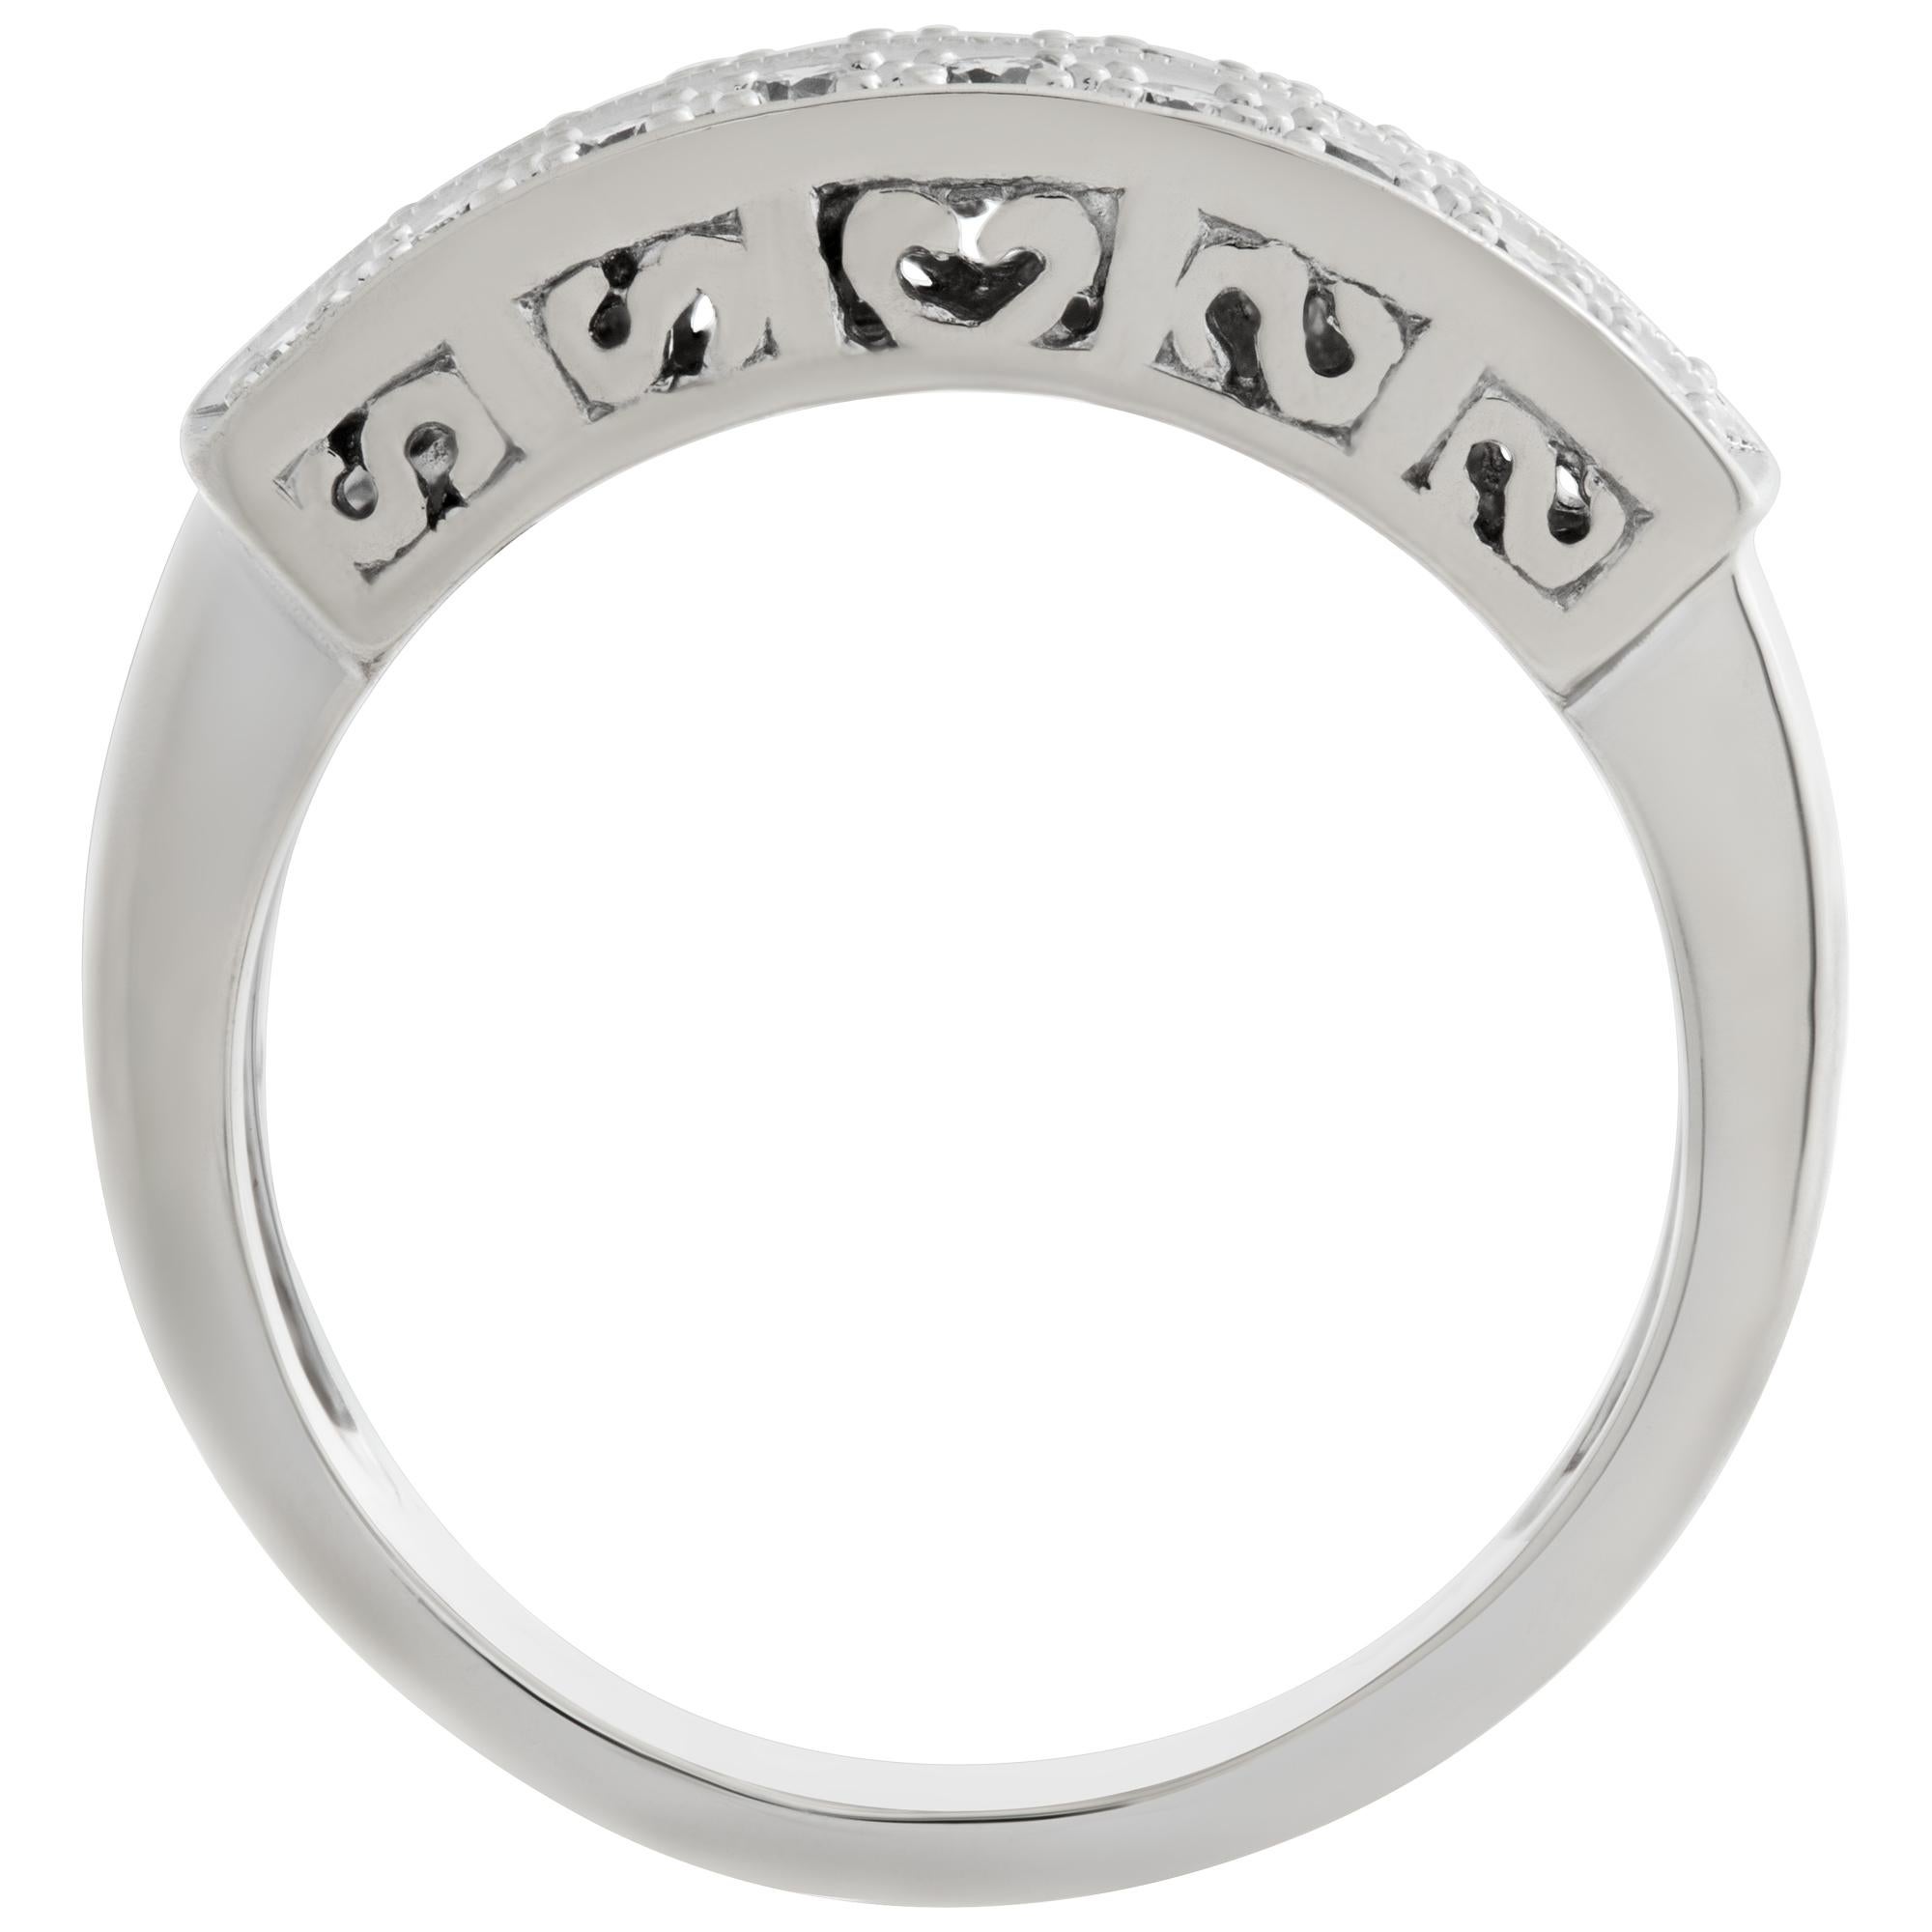 Women's Double row diamond band in 14k white gold. 0.35 carats in diamonds; size 6 3/4 For Sale